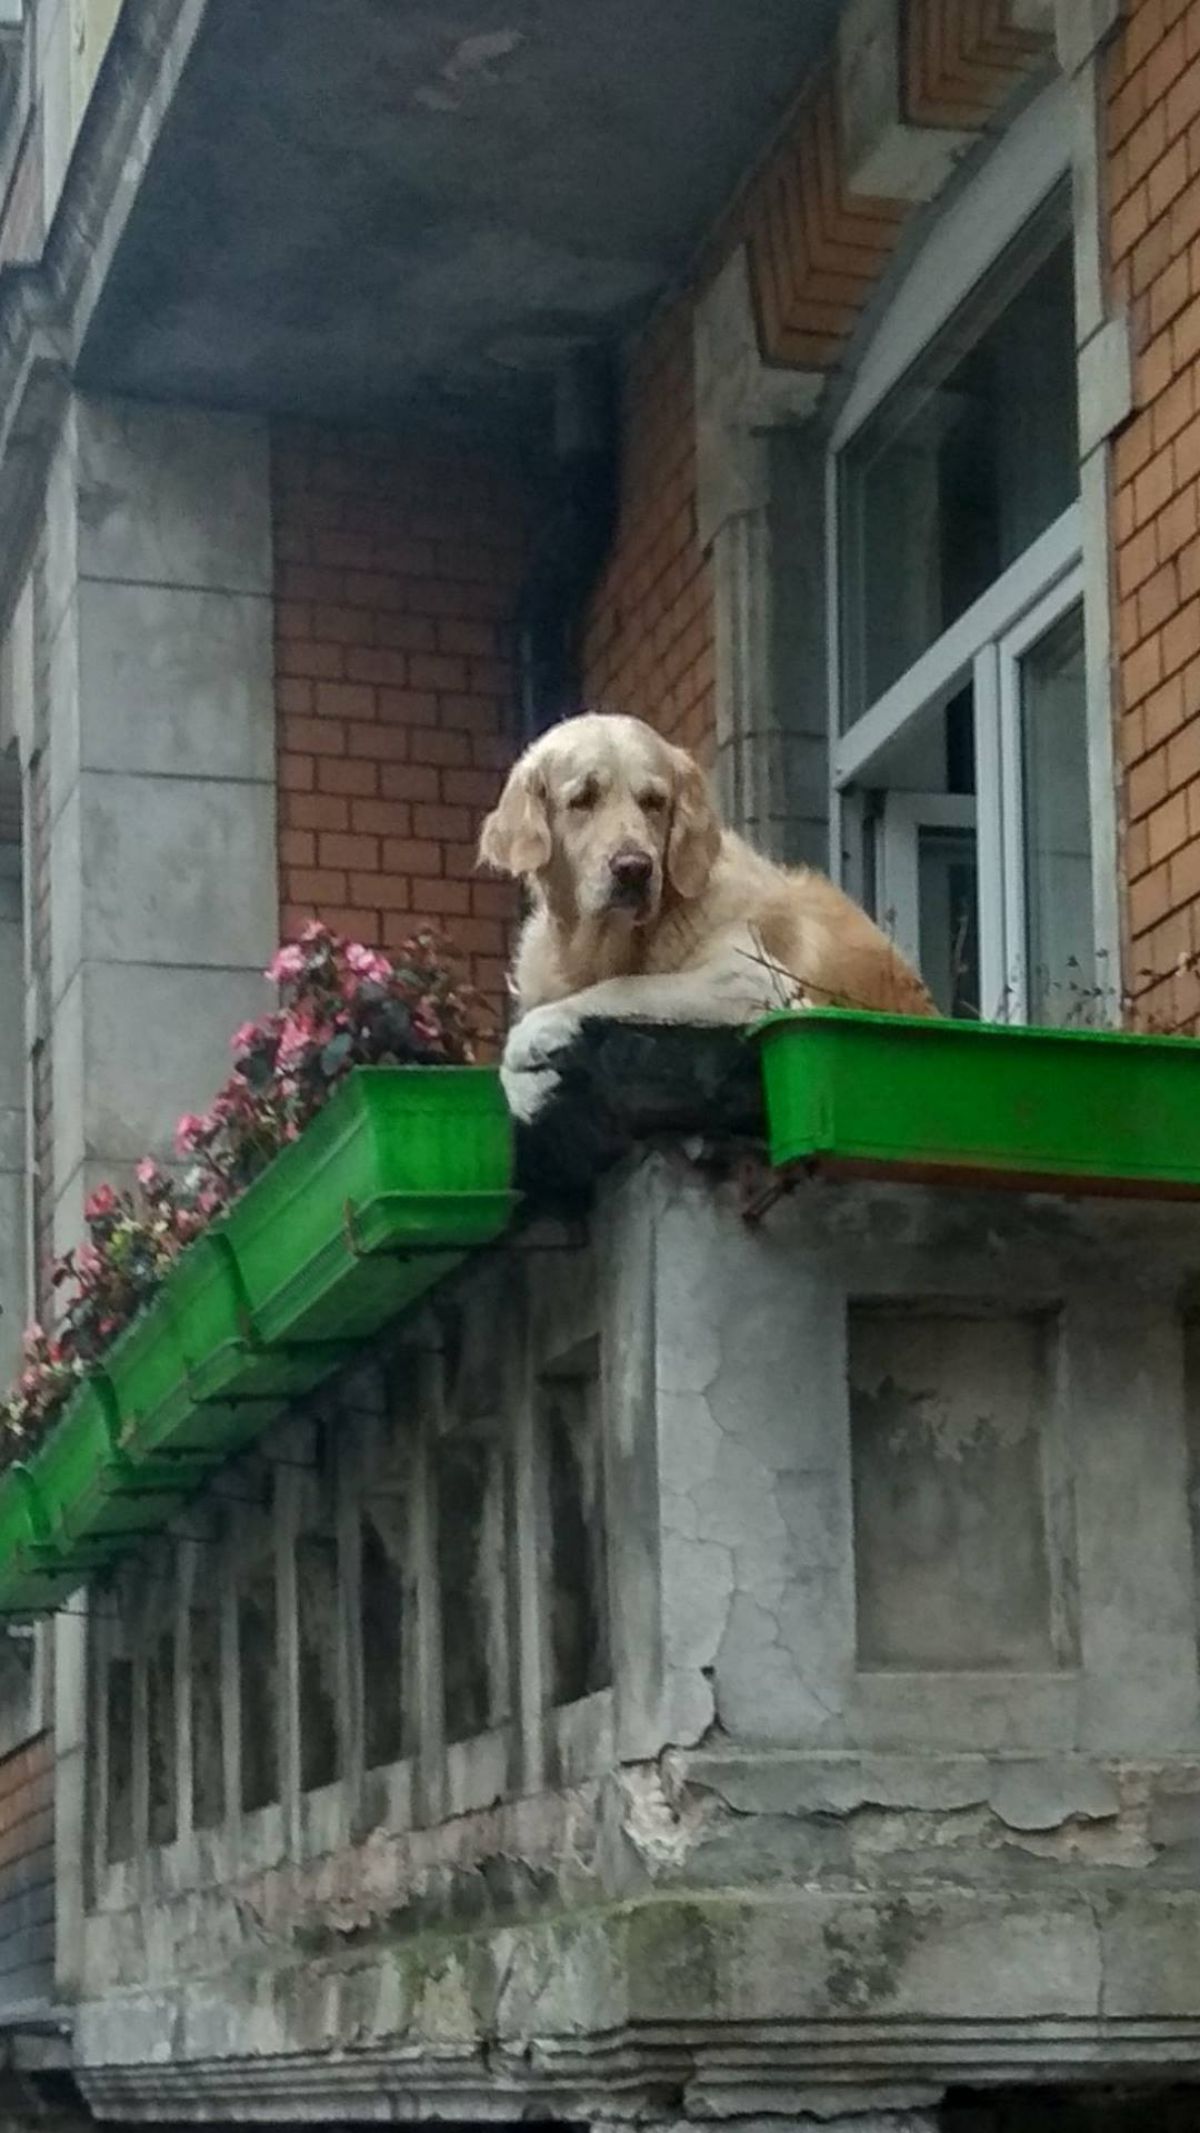 golden retriever hanging over a balcony with green flower pots with pink flowers